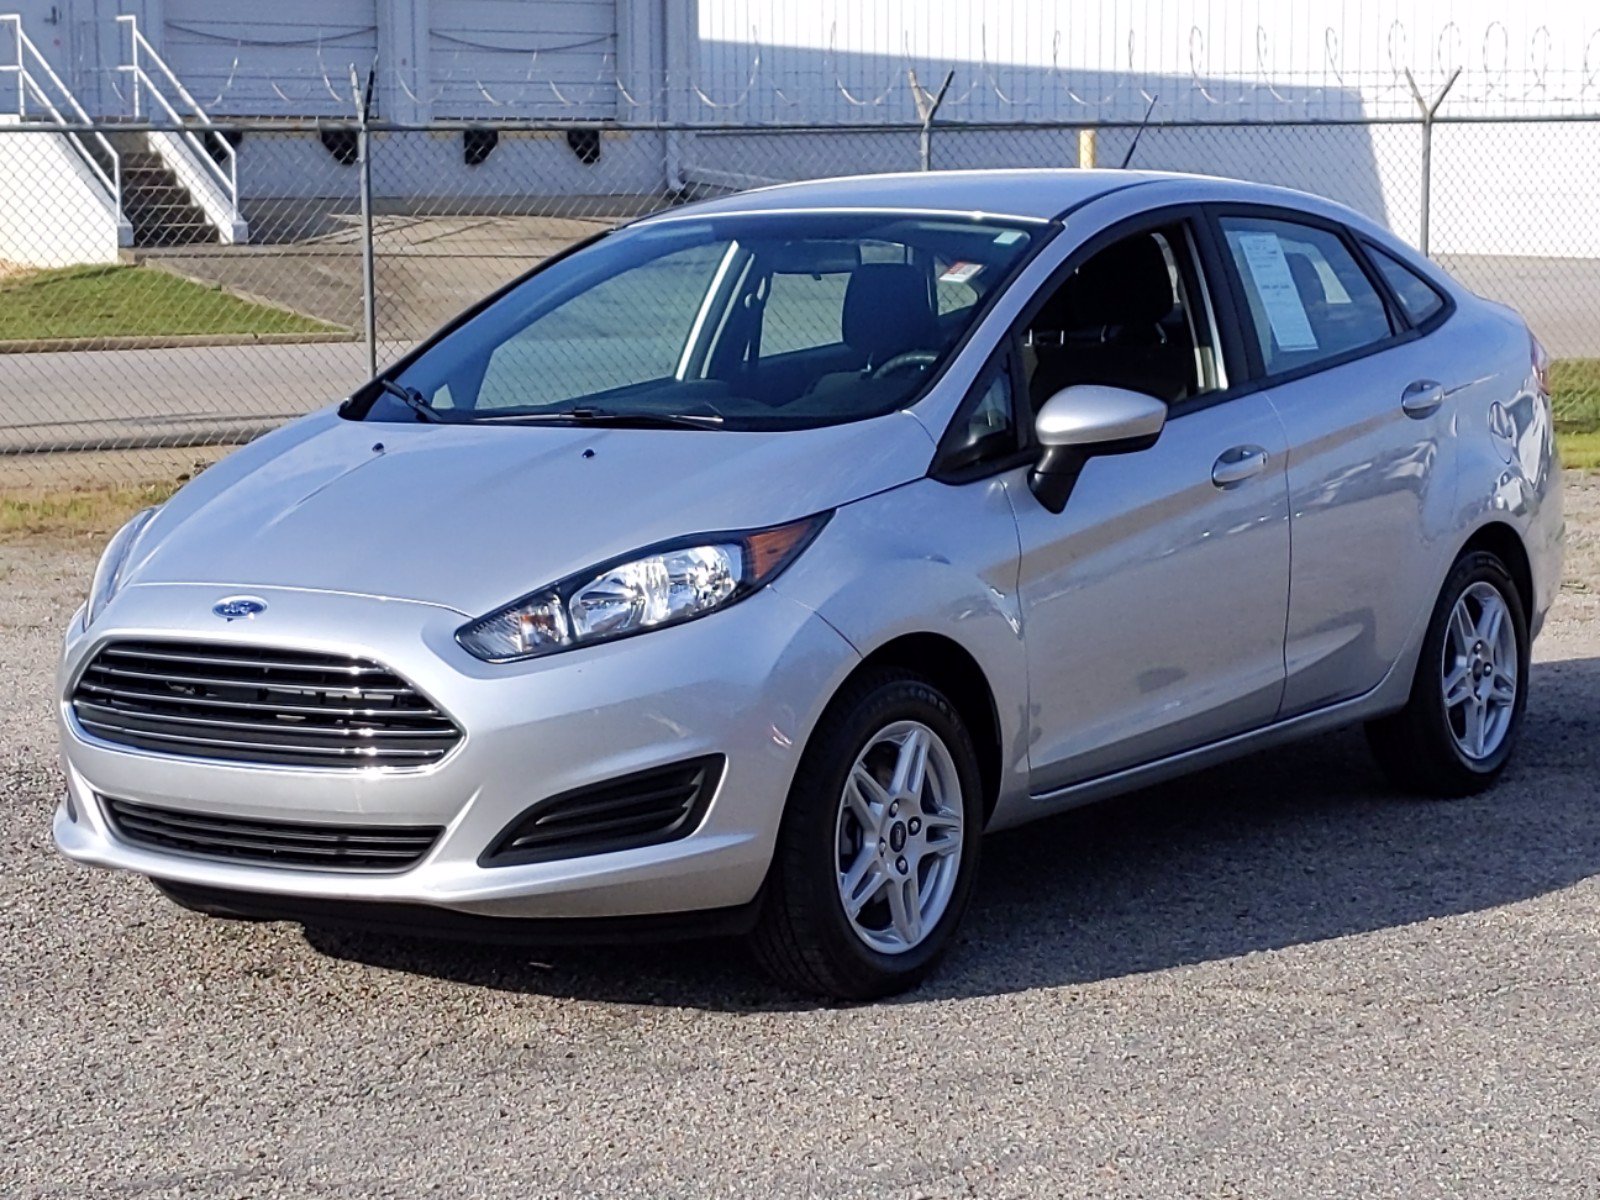 PreOwned 2019 Ford Fiesta SE FWD 4dr Car